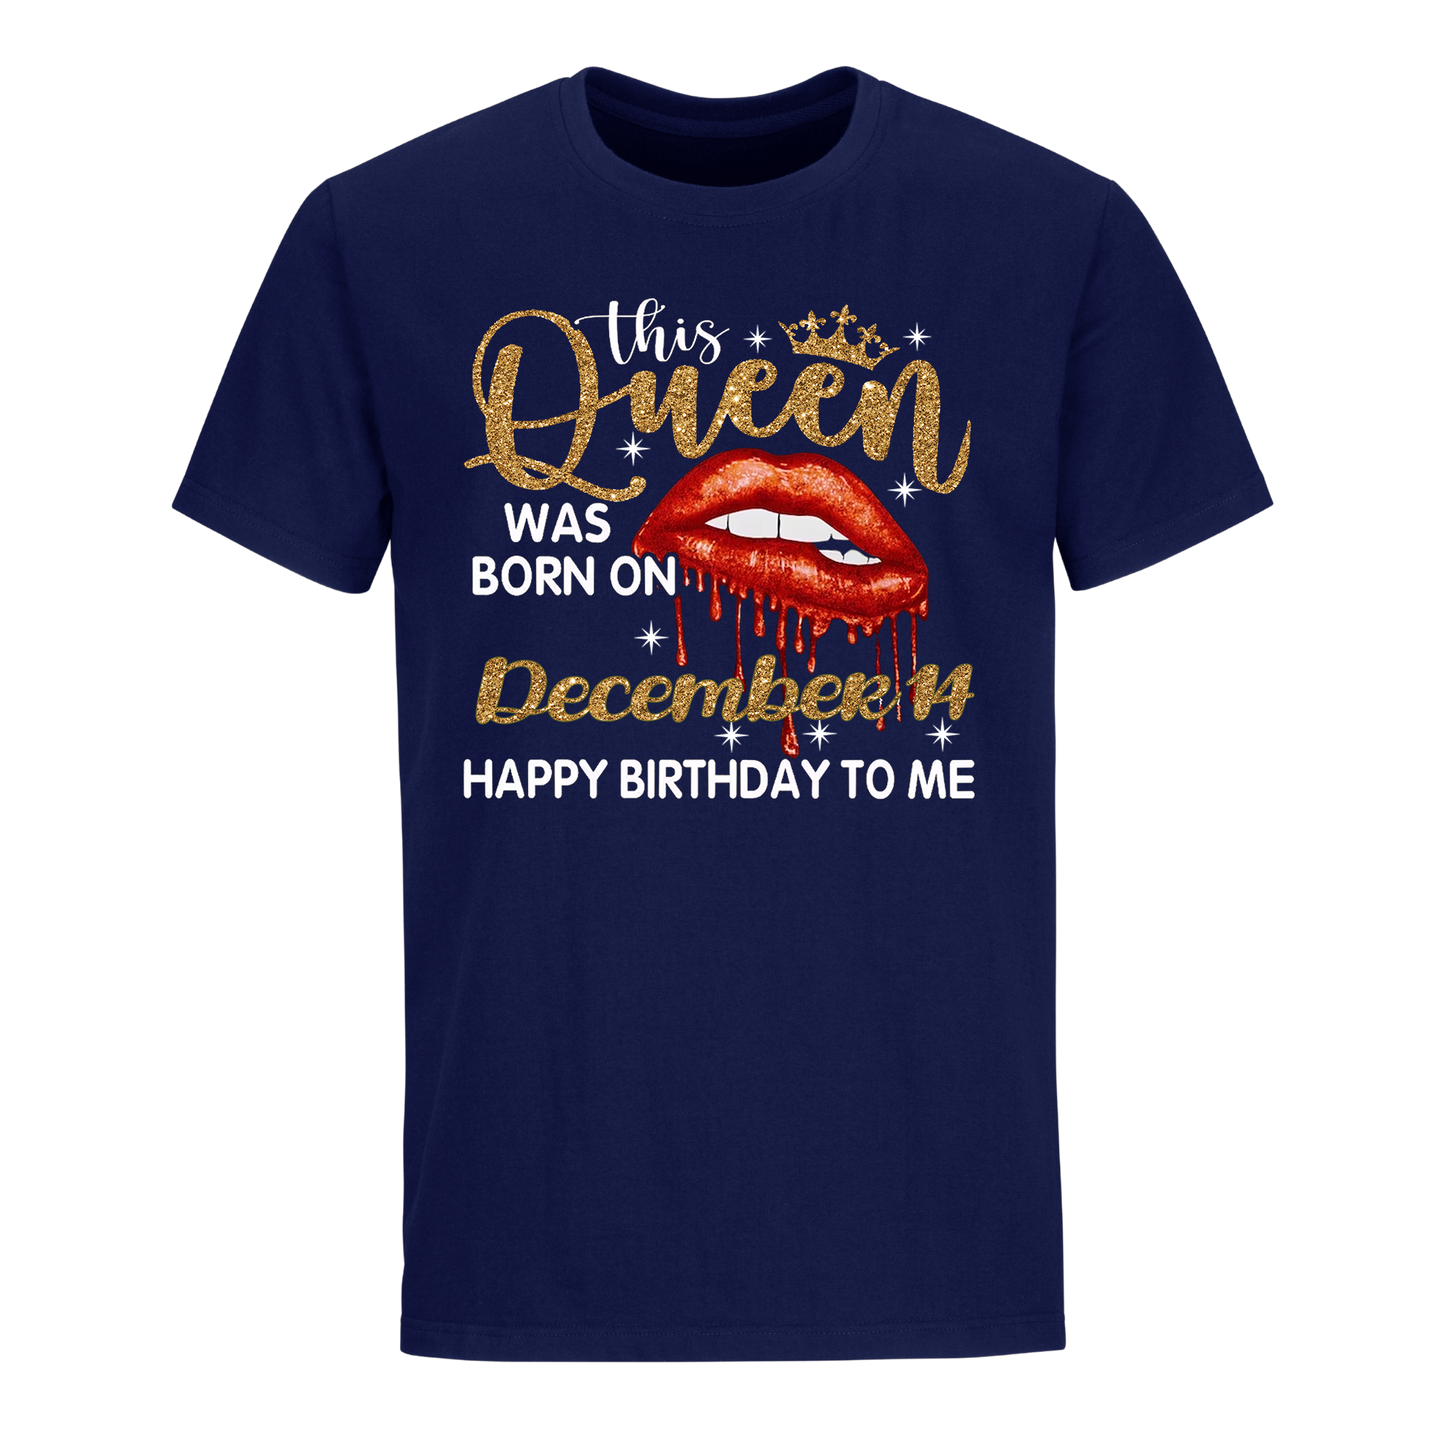 THIS QUEEN WAS BORN ON DECEMBER 14 UNISEX SHIRT